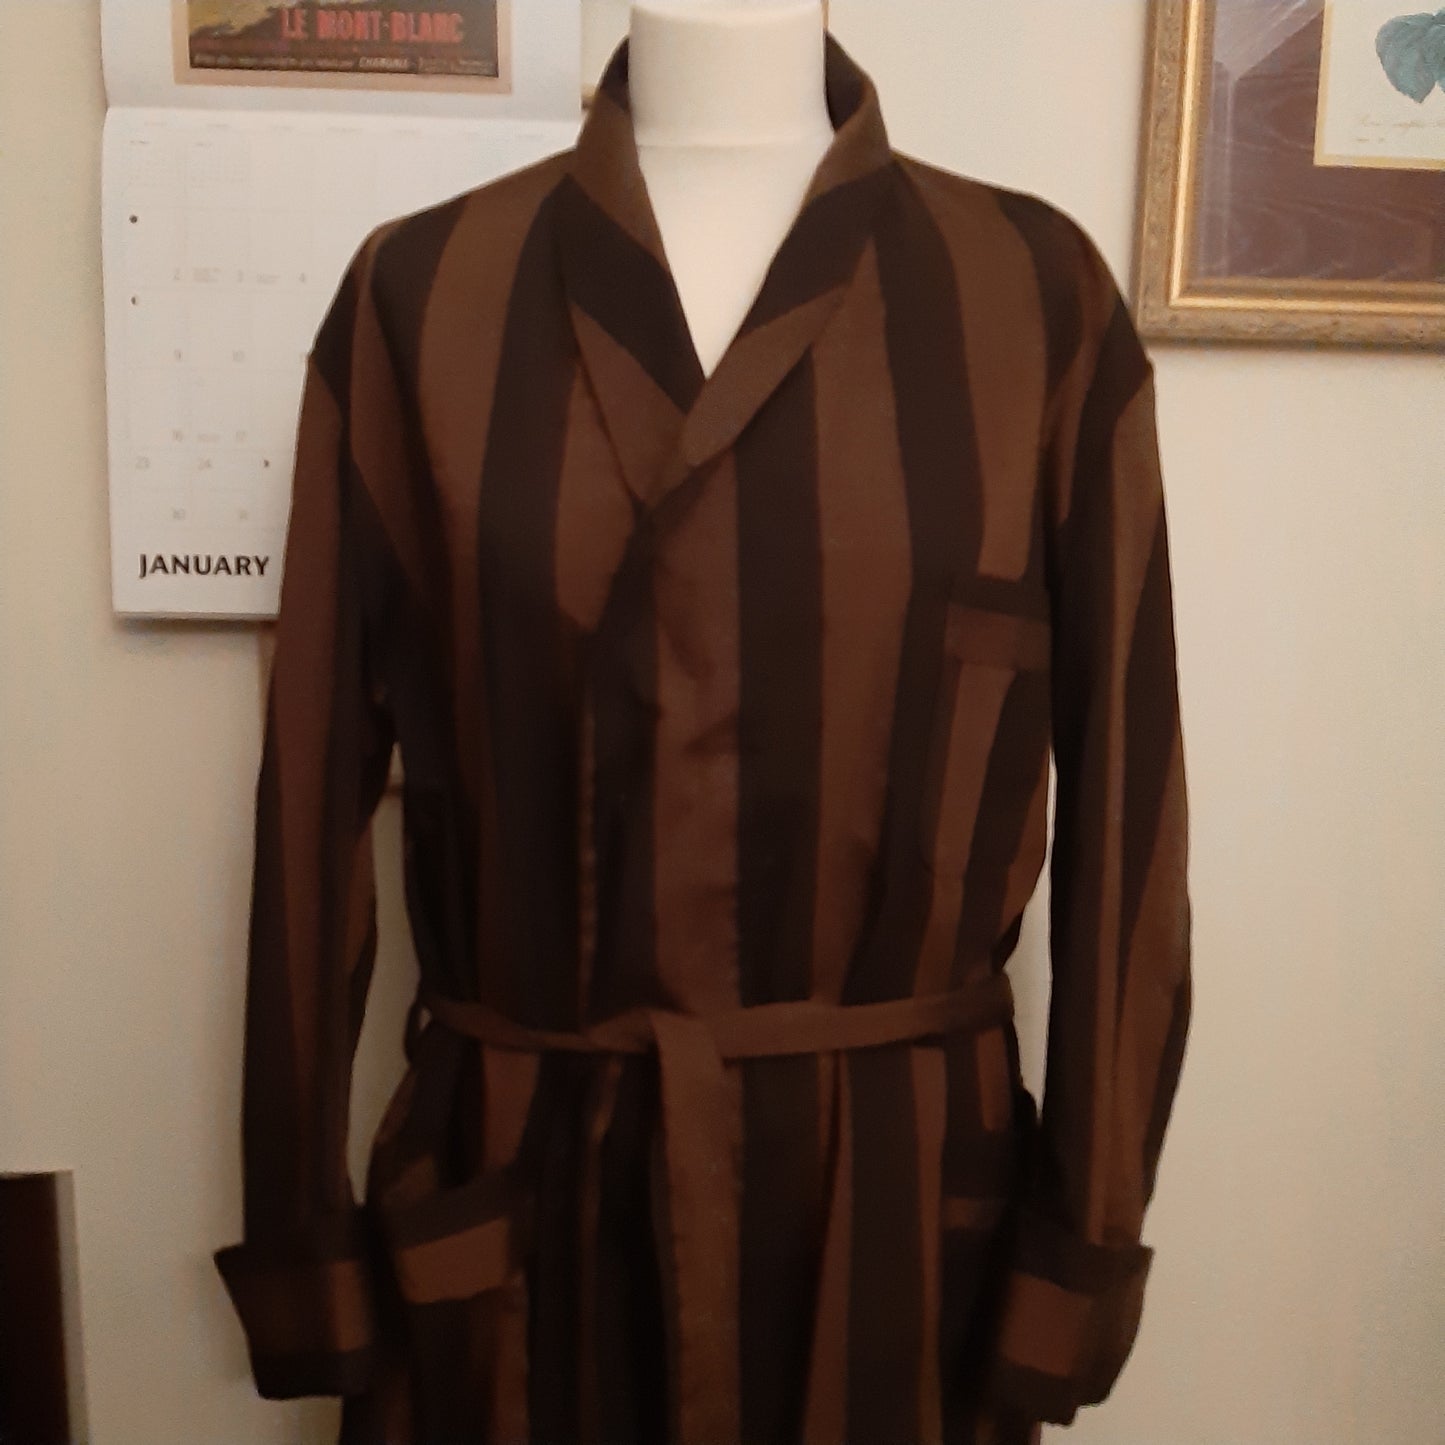 Striped brown and black robe